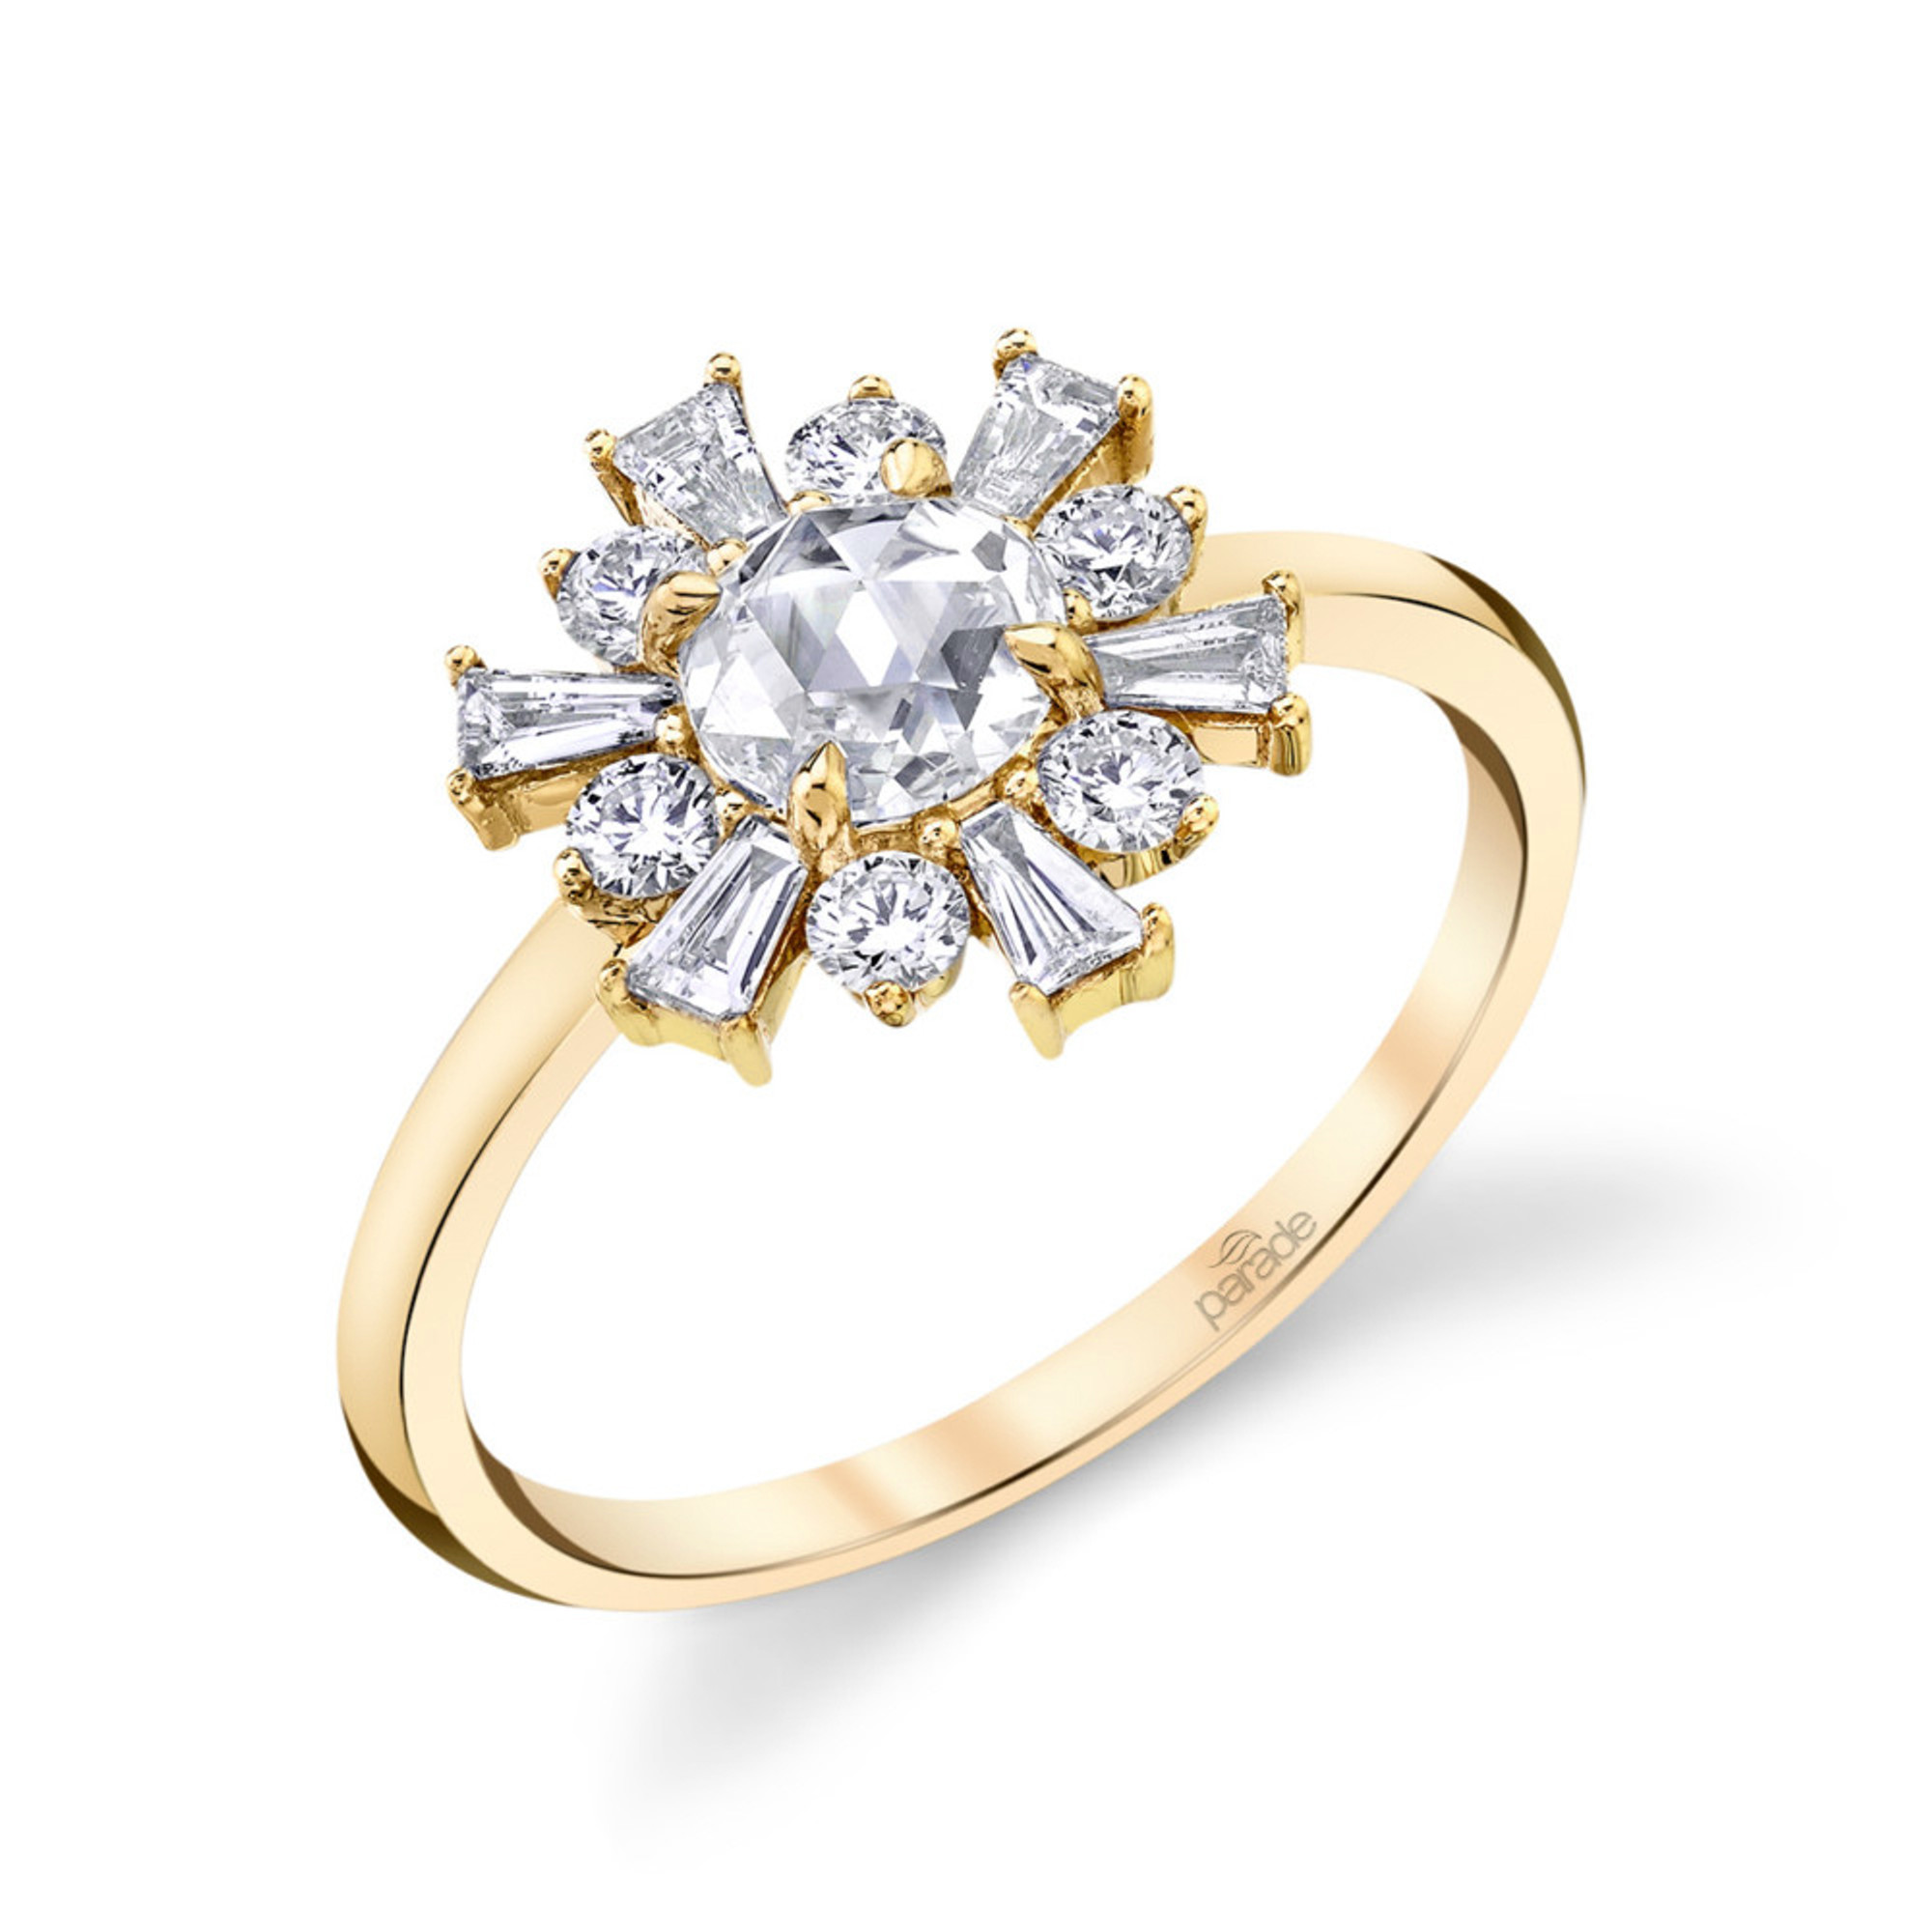 18k Yellow Gold & Rose Cut Diamond Flower Engagement Ring by Parade Designs